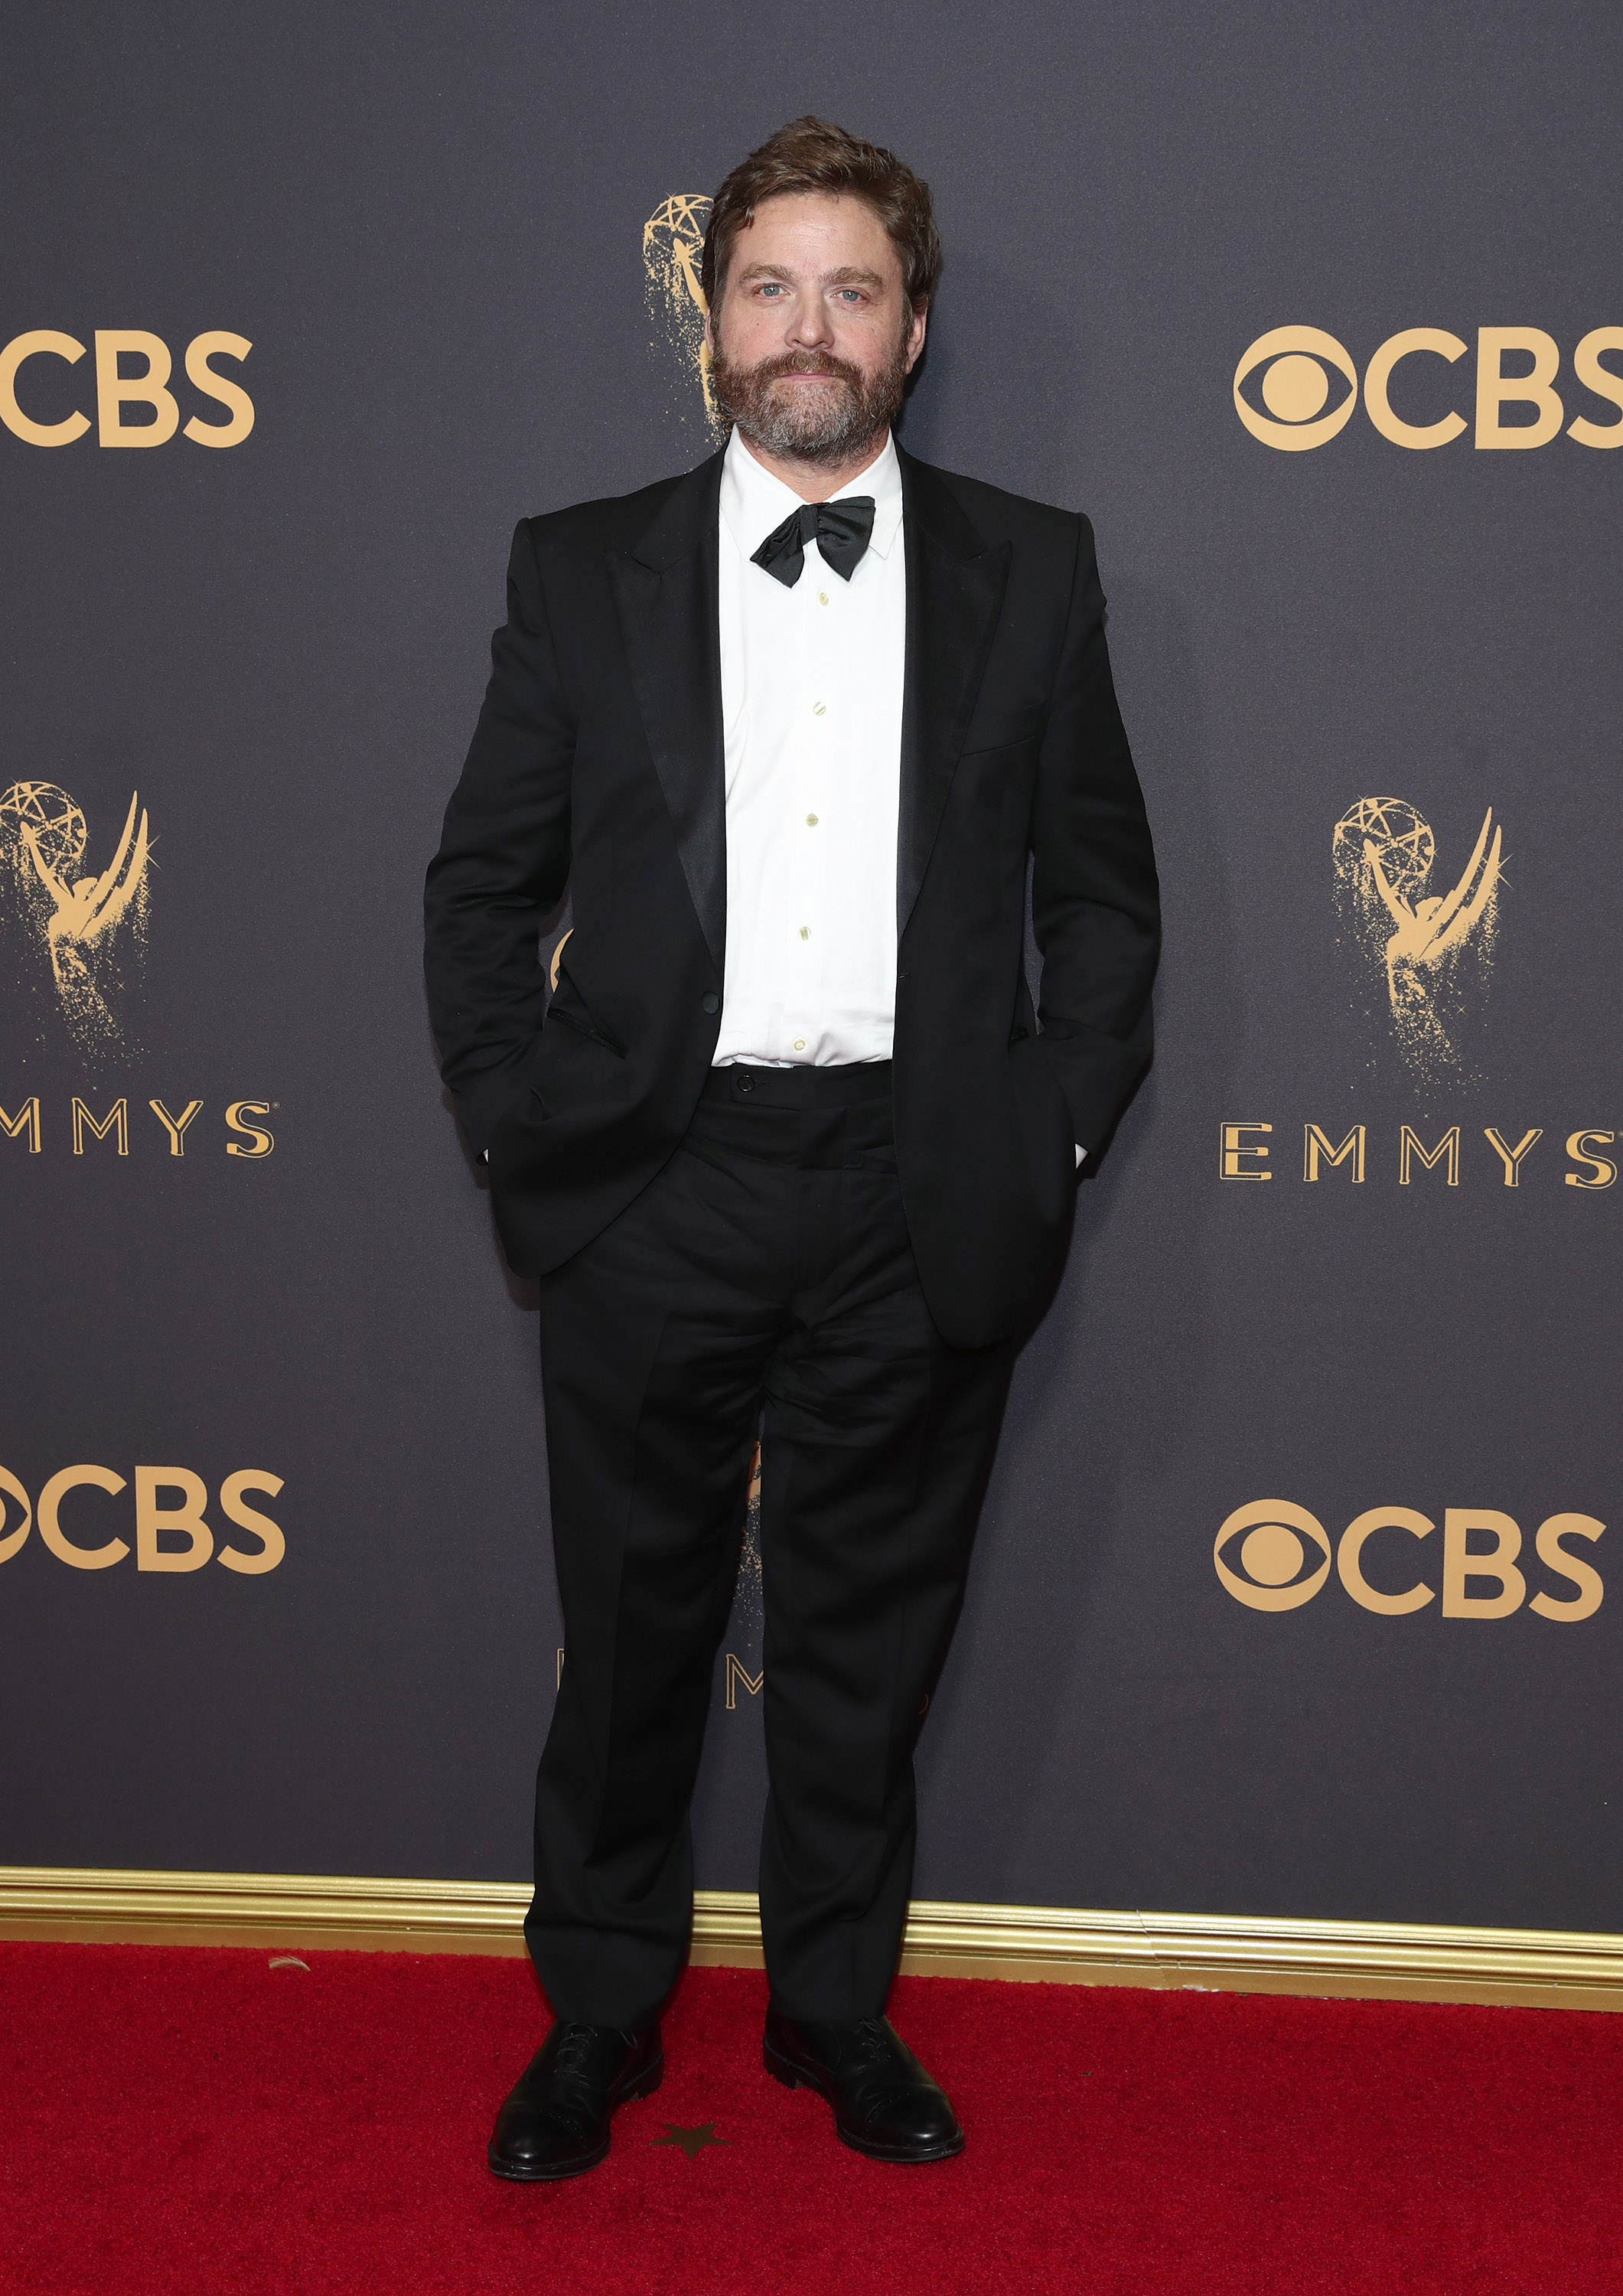 Zach Galifianakis at the 69th Annual Primetime Emmy Awards in Los Angeles, California, on September 17, 2017. | Source: Getty Images